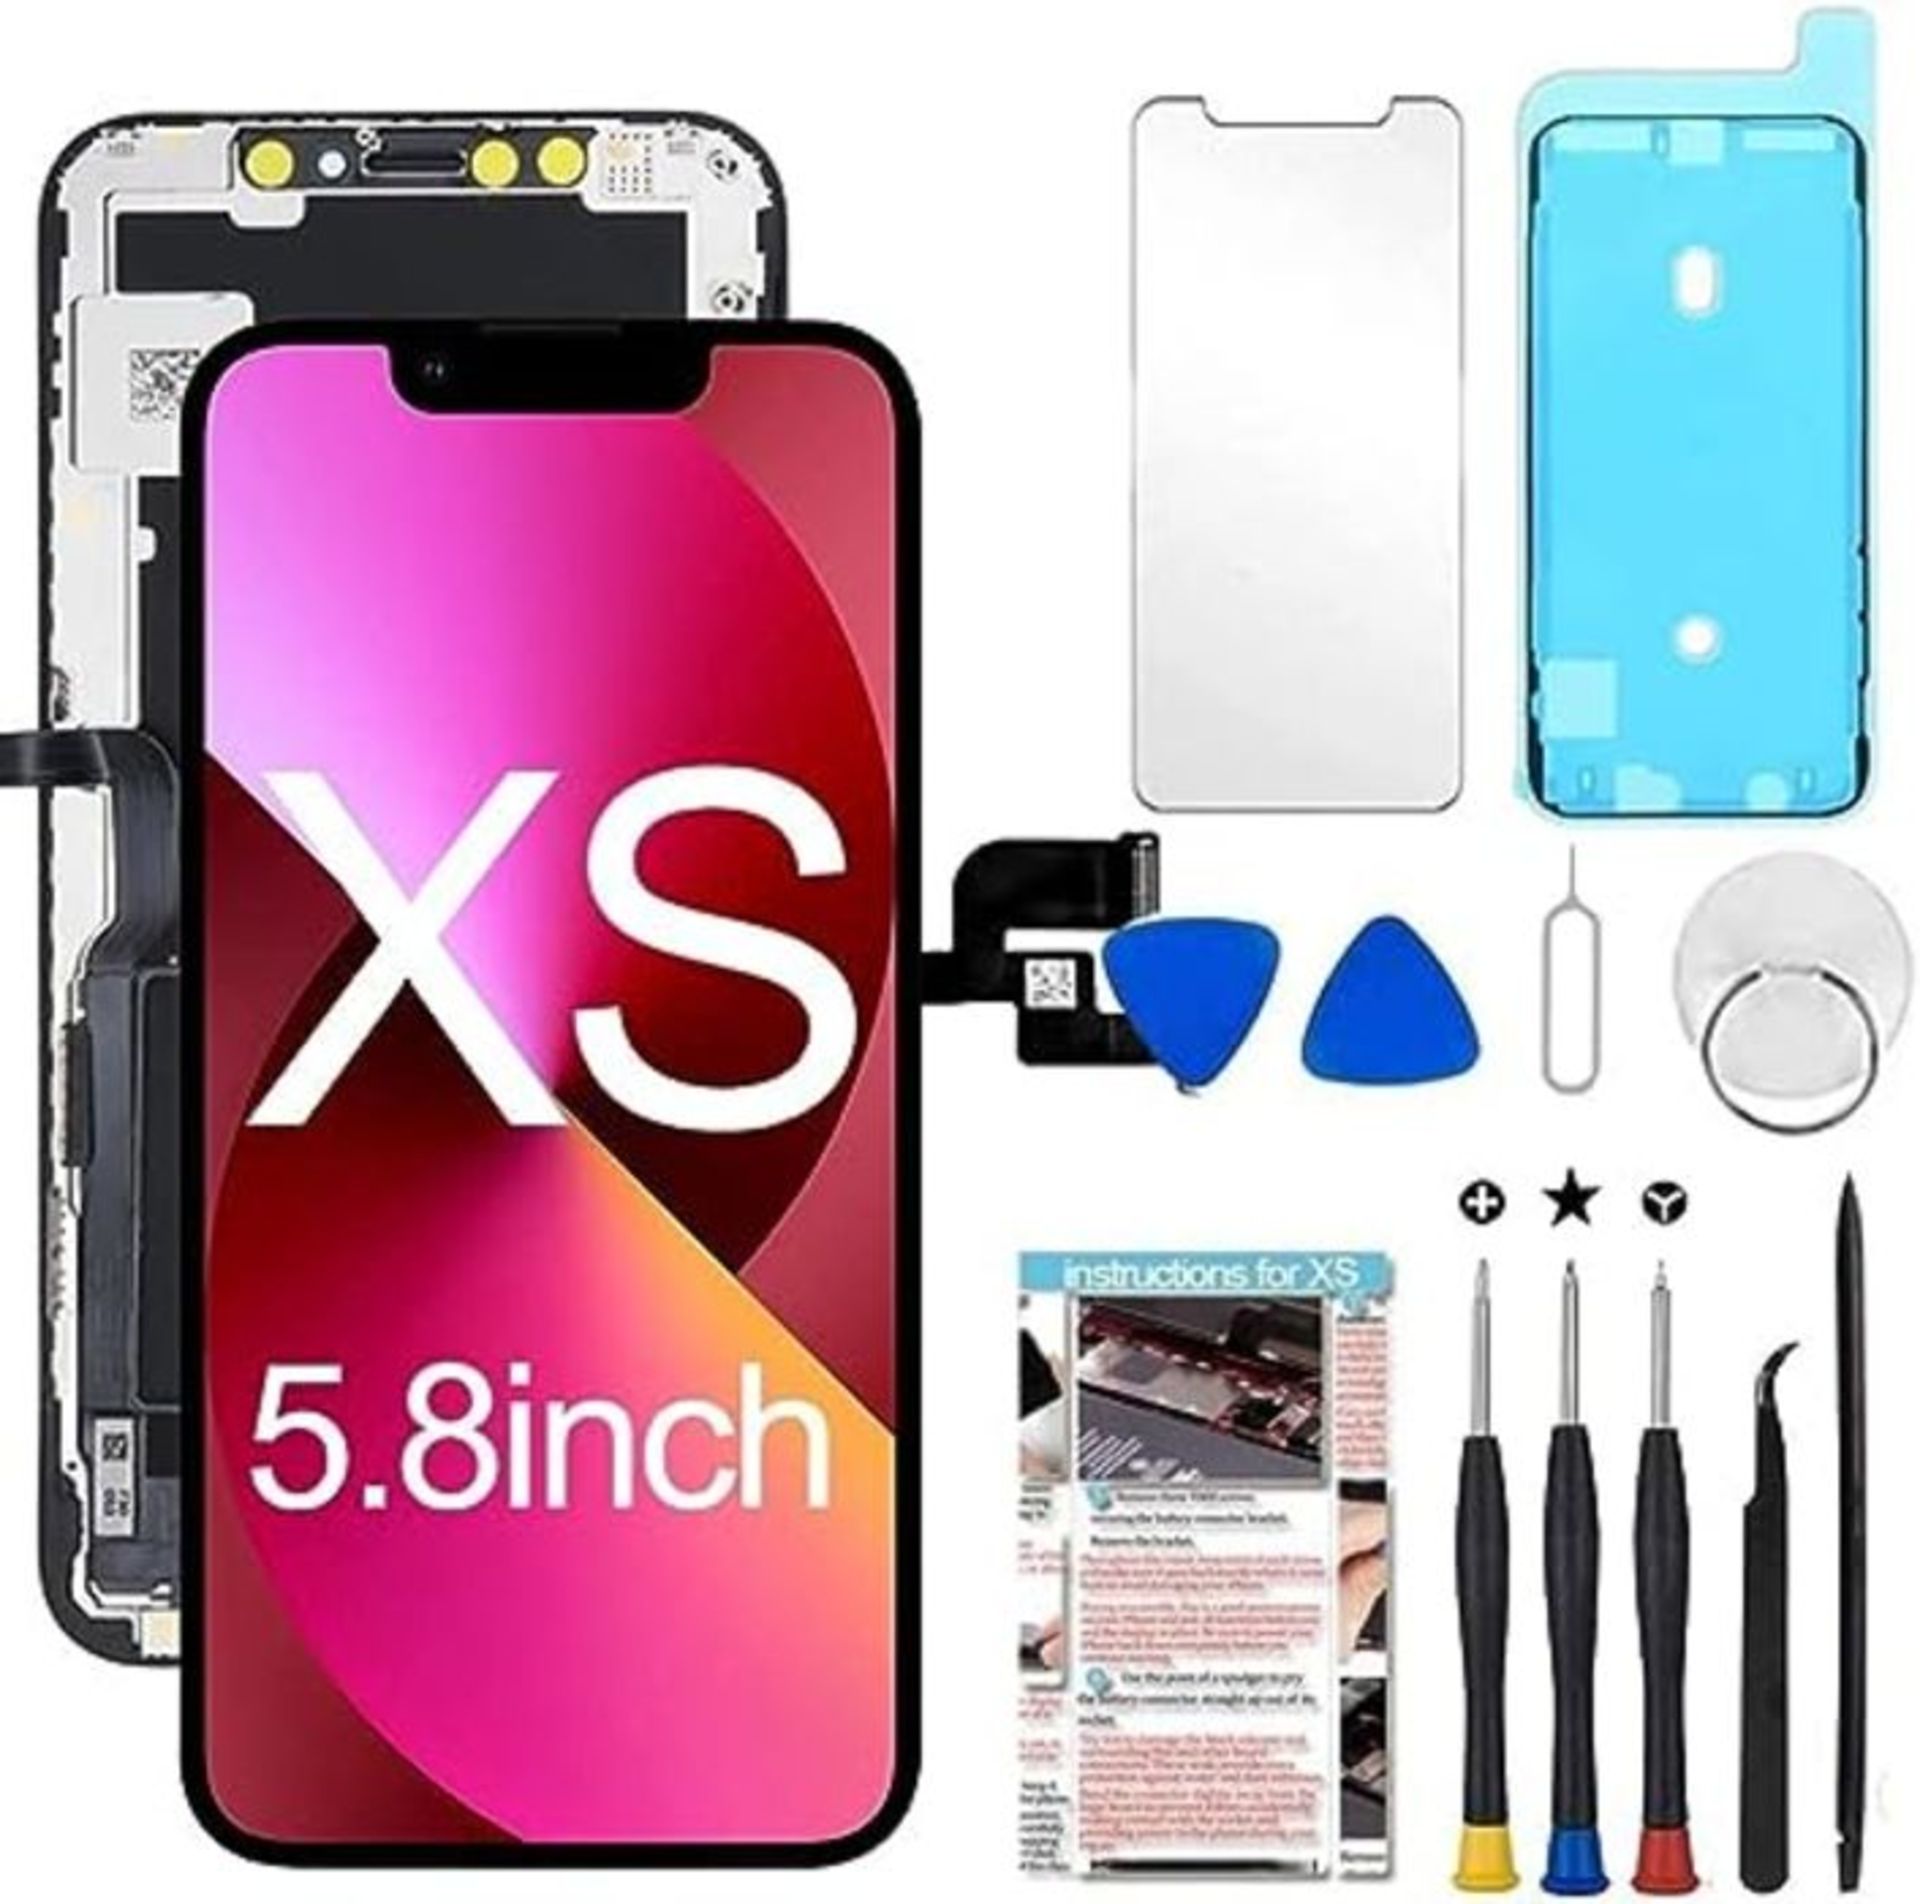 Fixerman for iPhone XS Screen Replacement LCD 5.8 inch Touch Screen Display Digitizer - Image 3 of 6